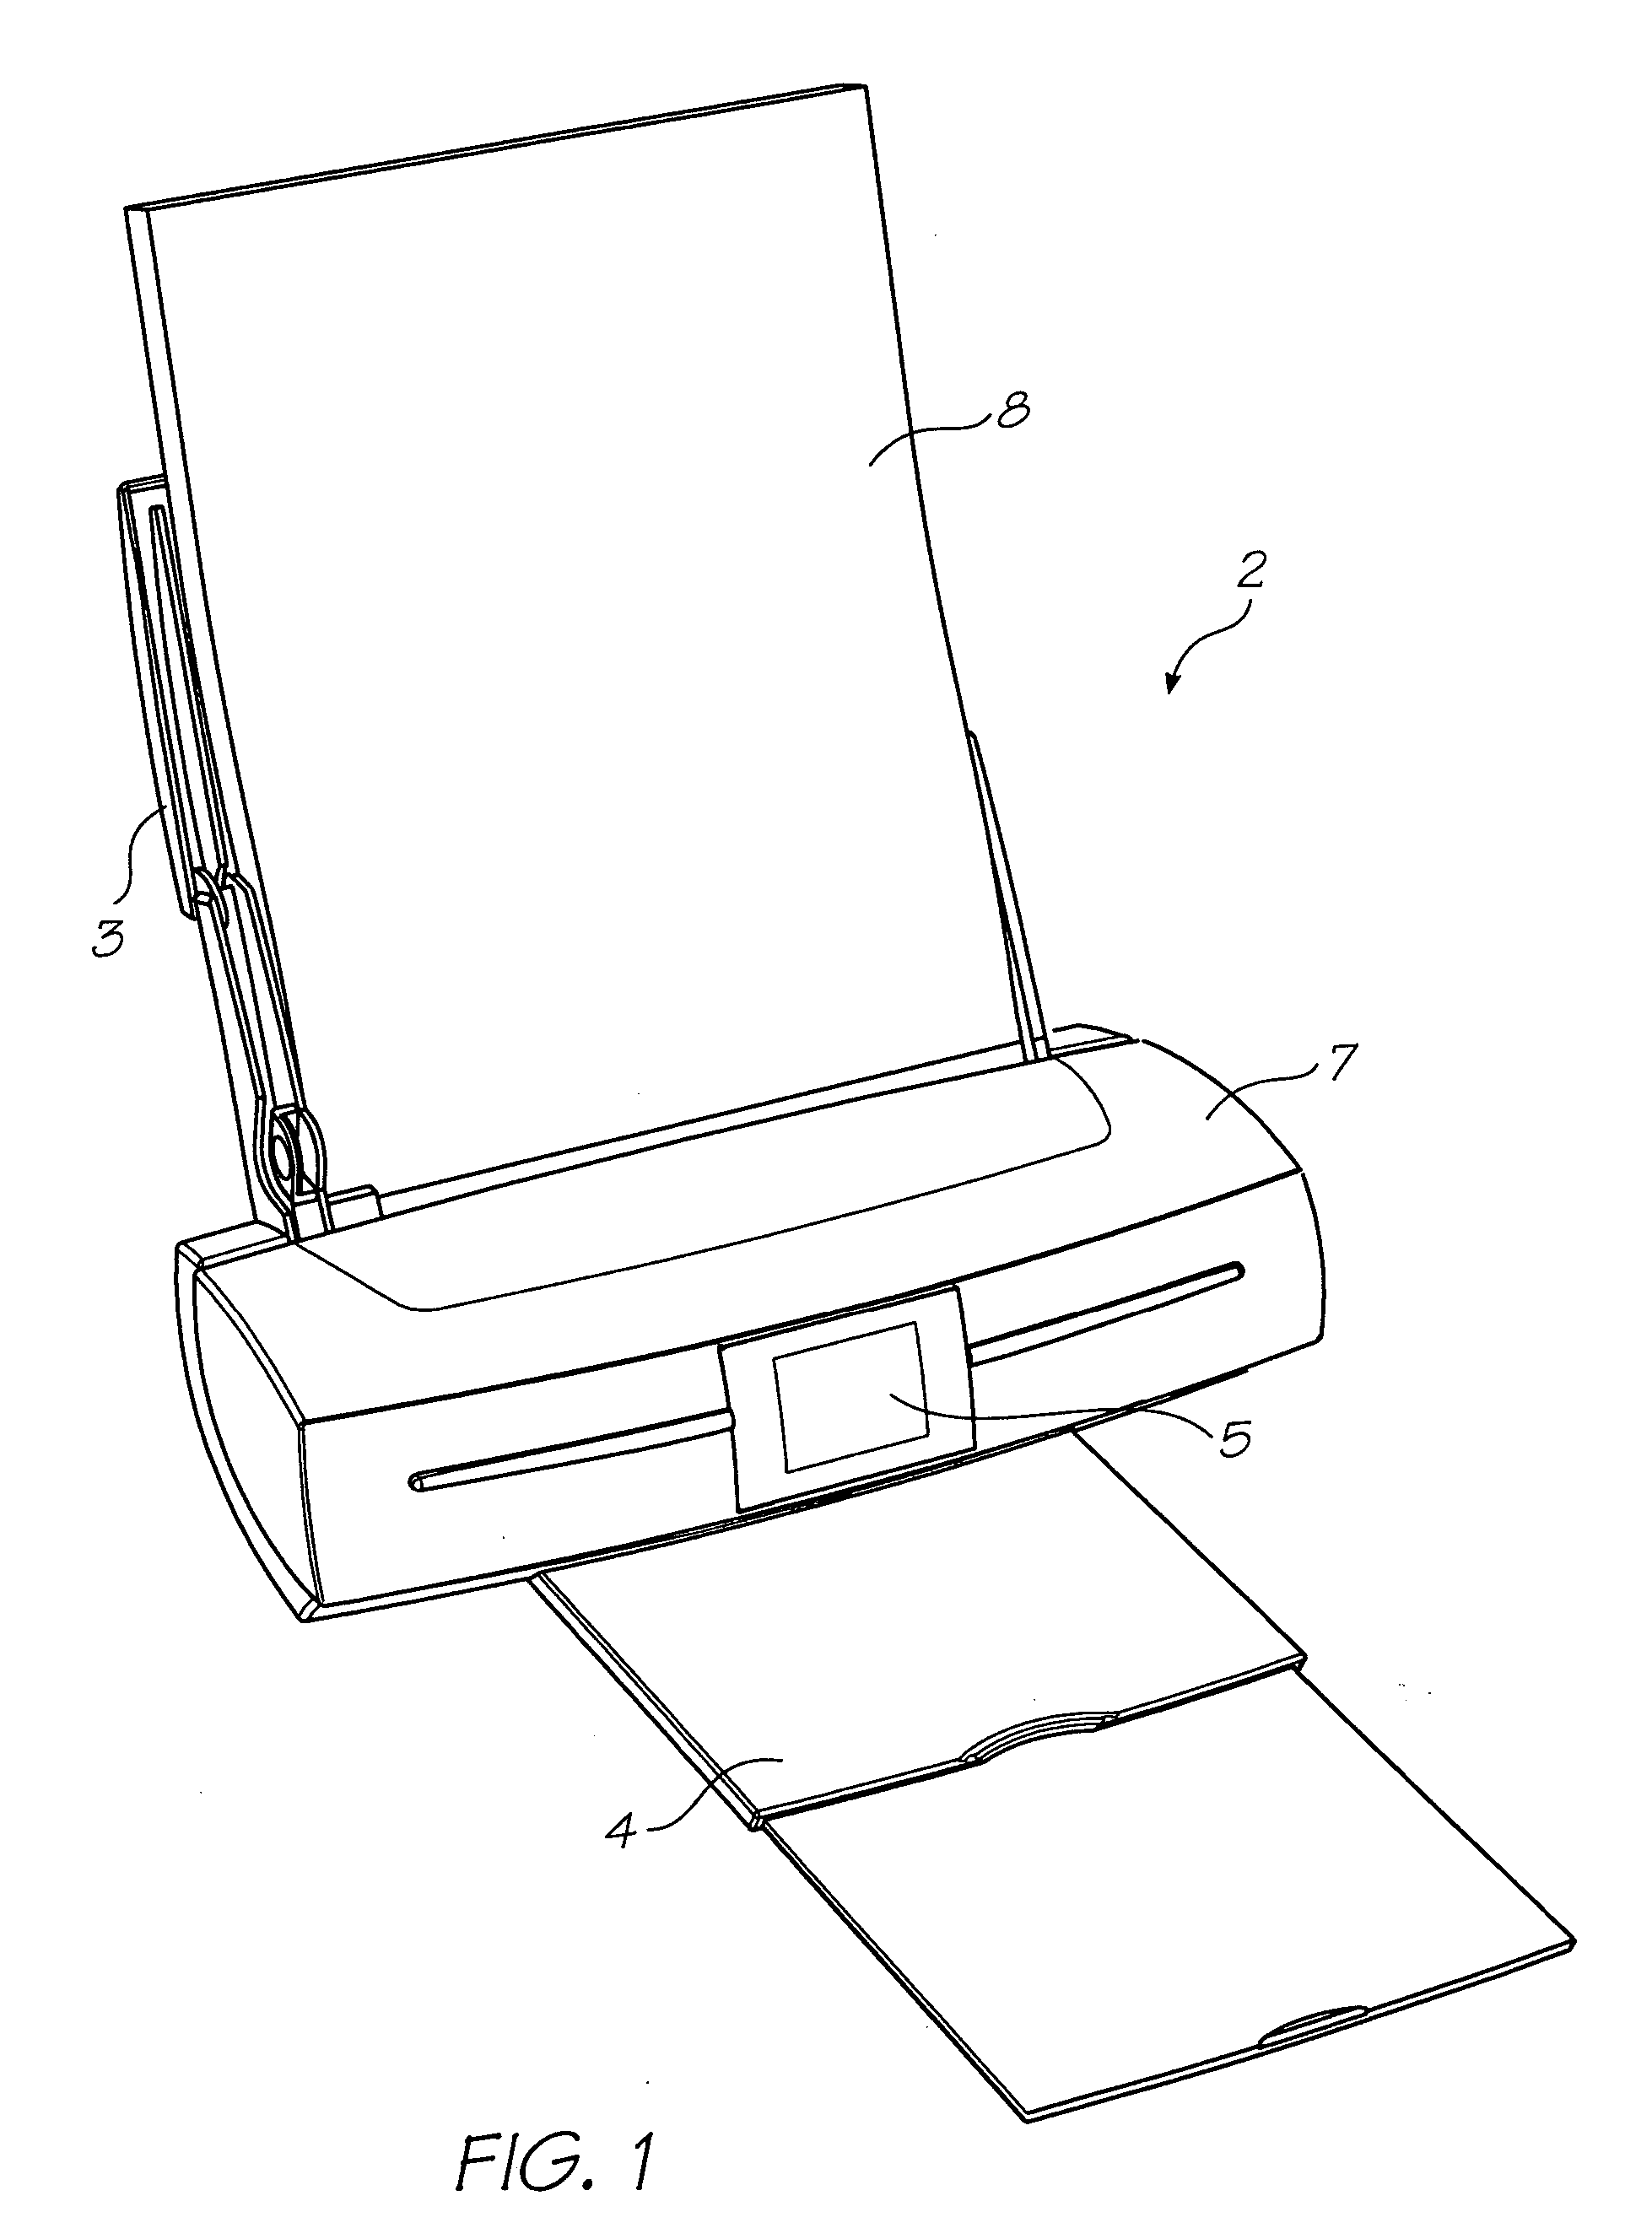 Refill unit for engaging with, and closing the outlet valve from an ink storage compartment